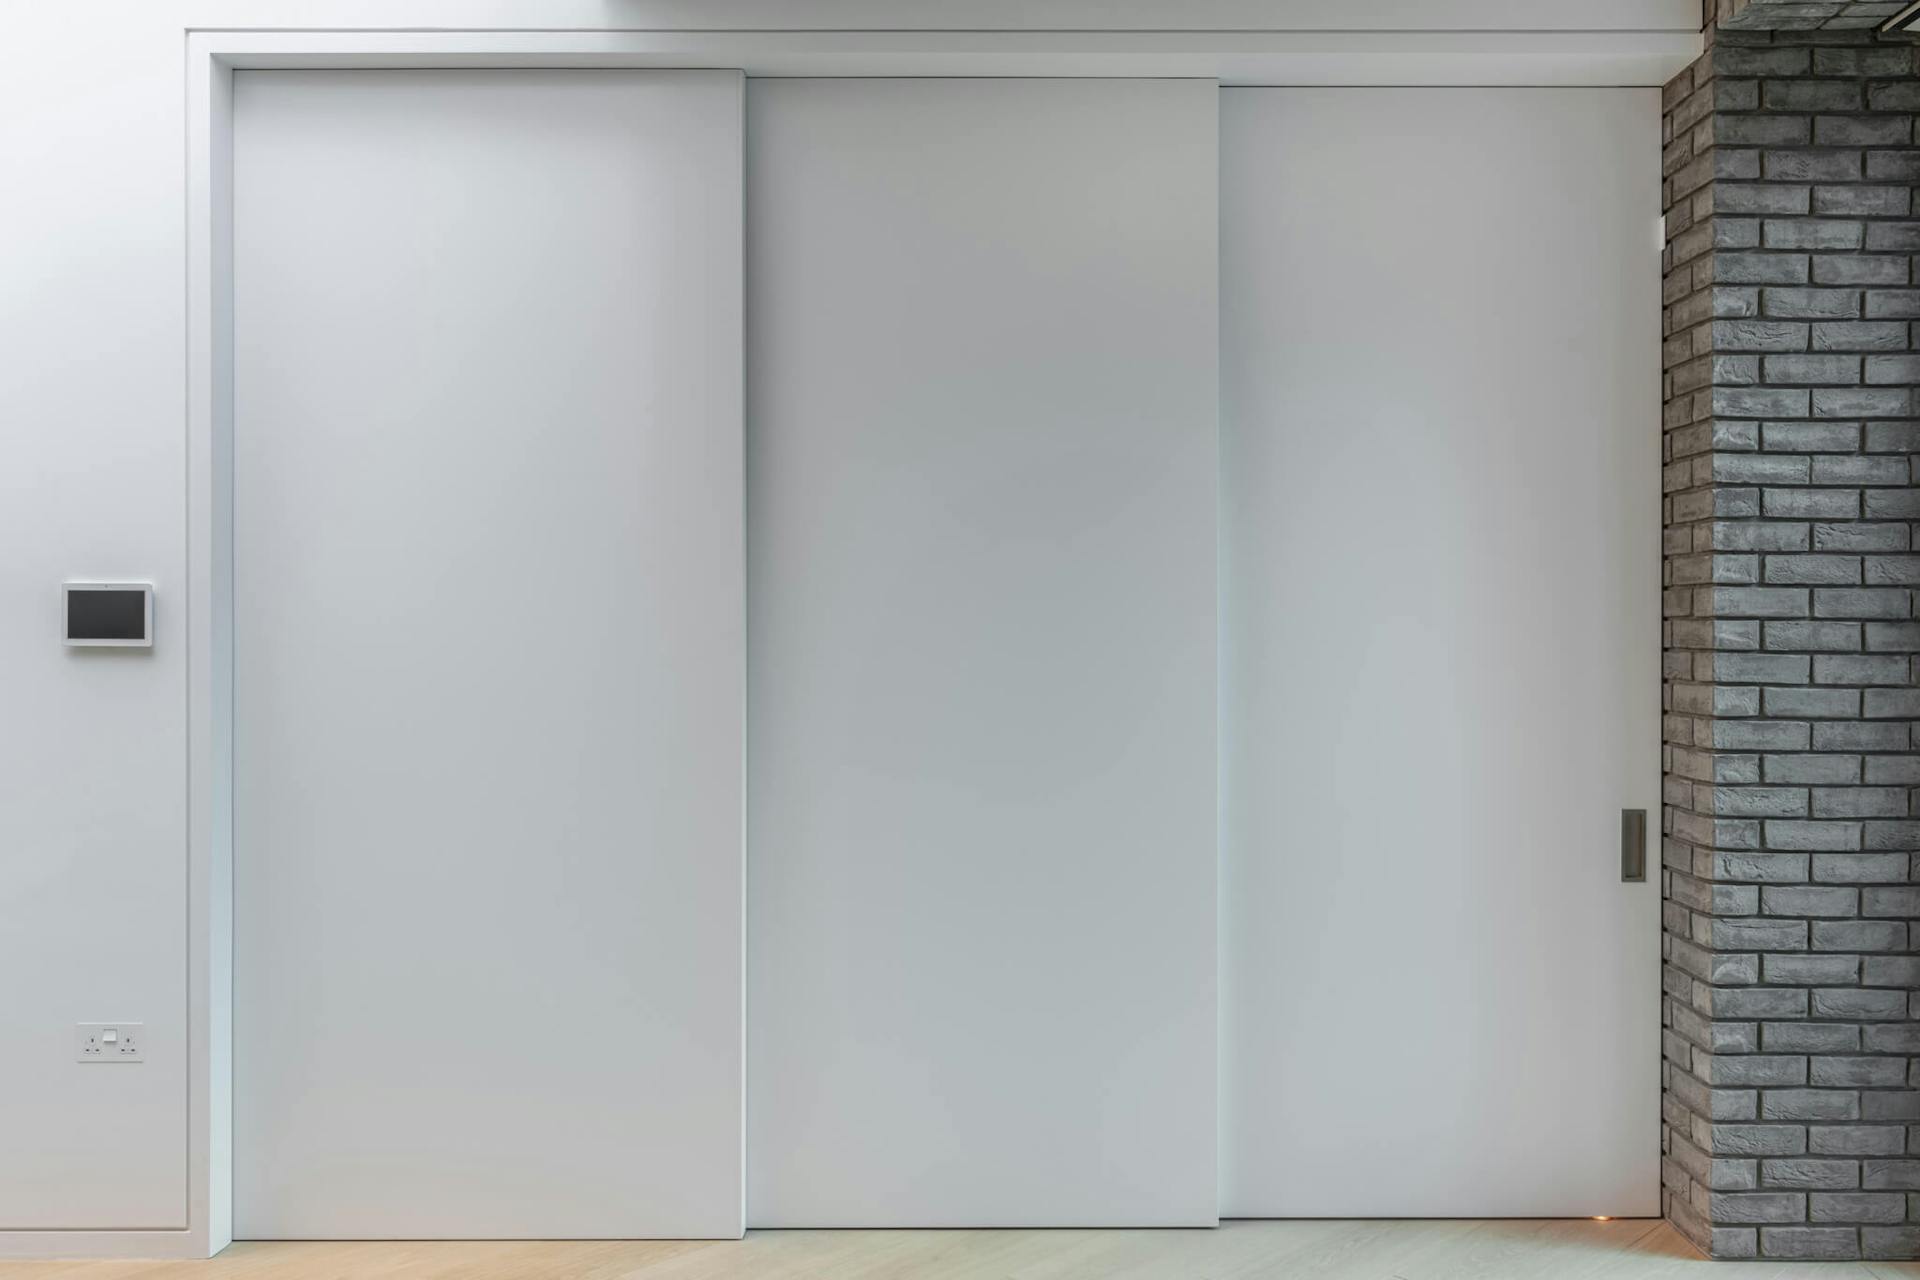 A fully closed set of three white sliding doors on a telescopic track against a grey brick internal wall.